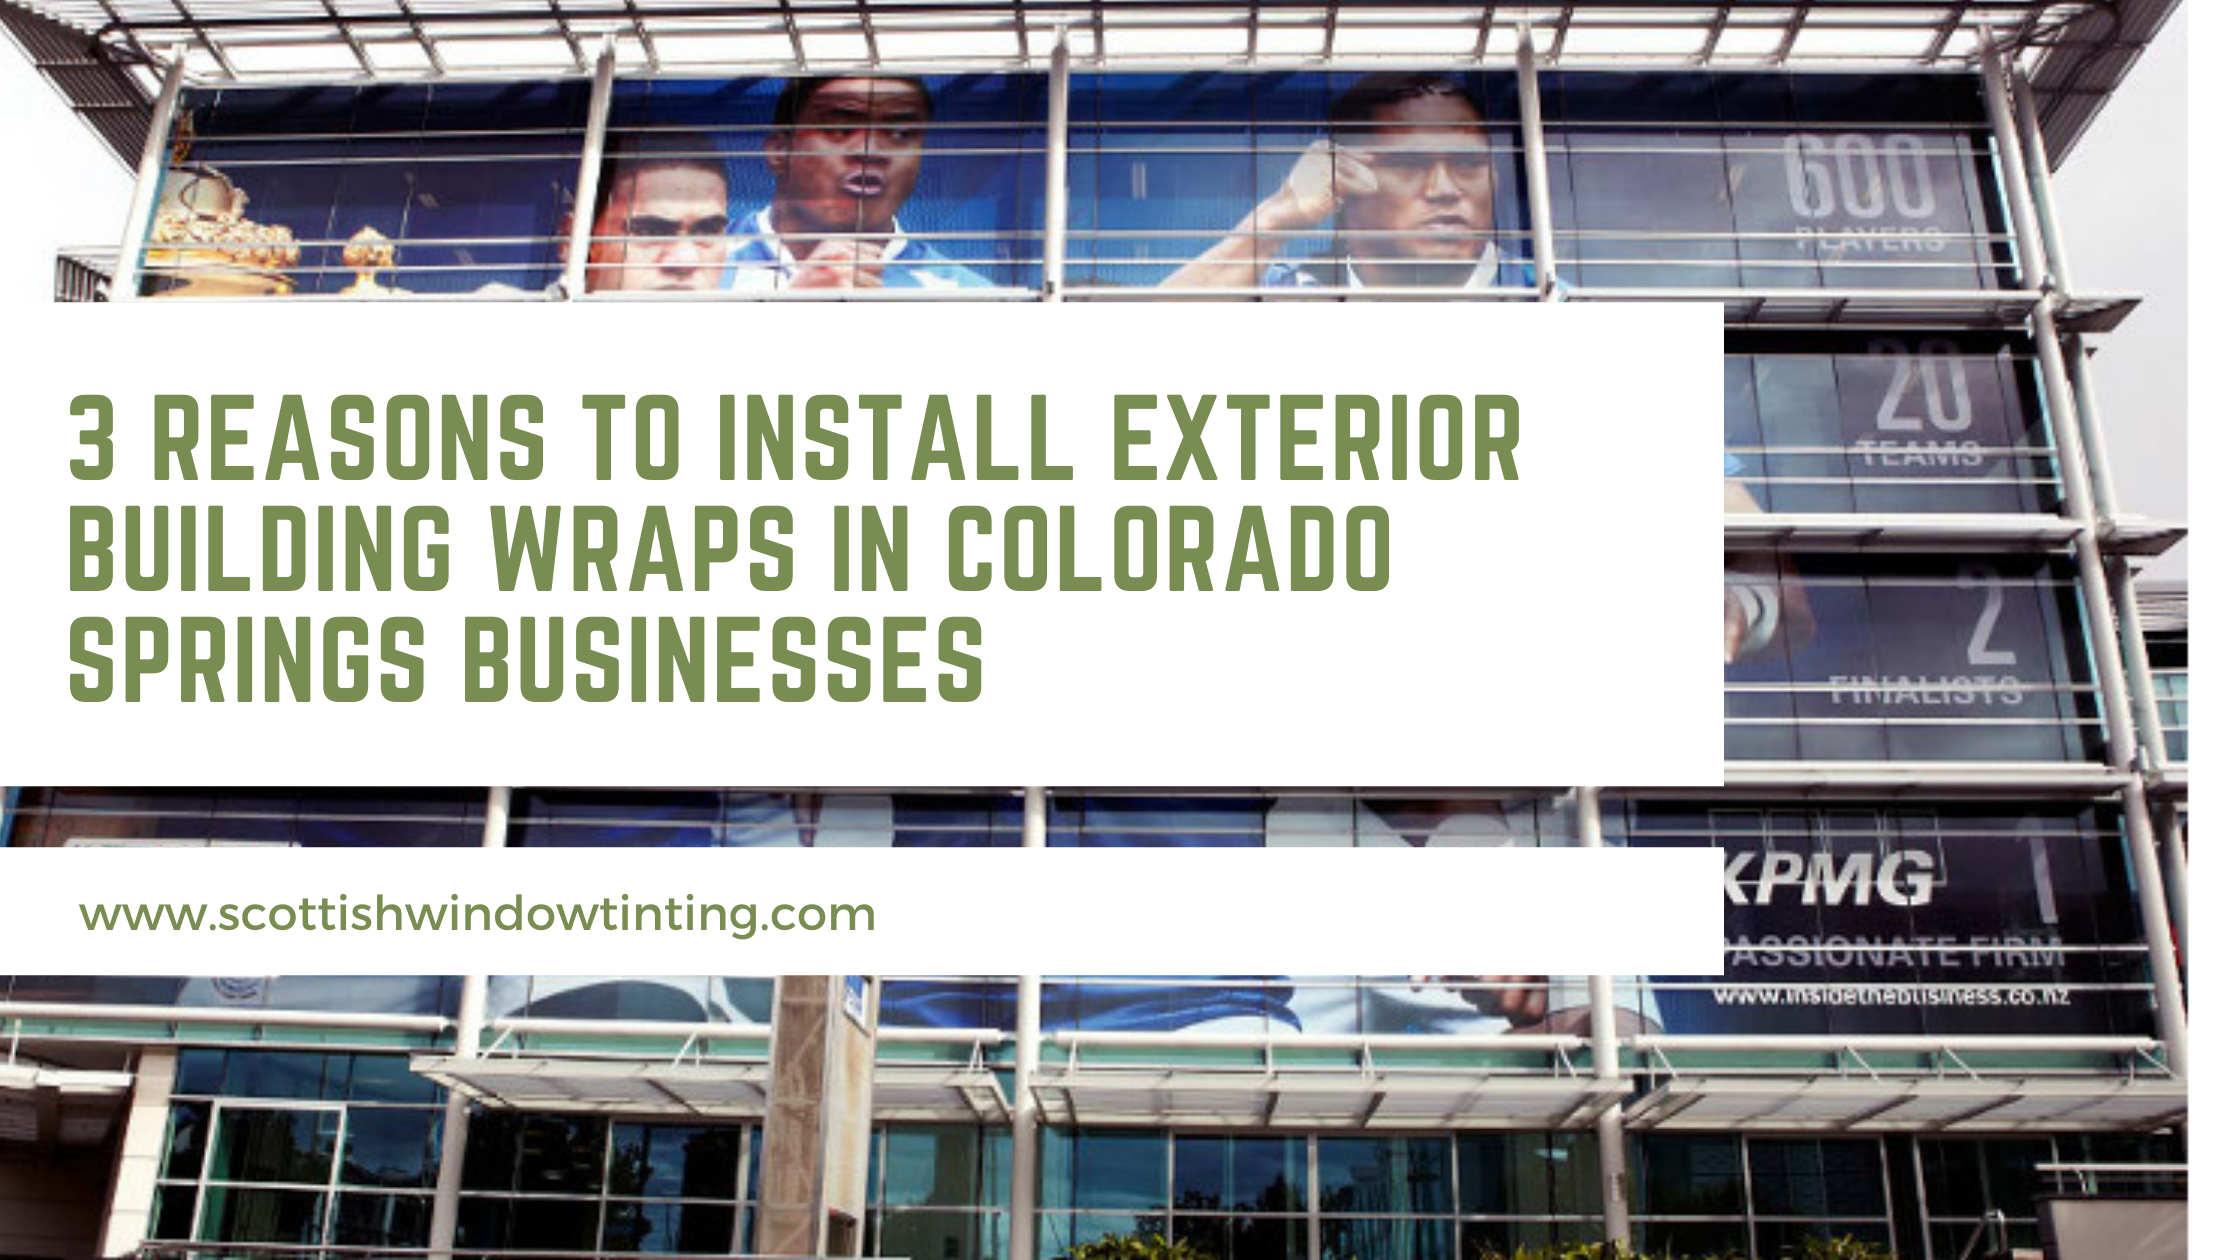 3 Reasons to Install Exterior Building Wraps in Colorado Springs Businesses